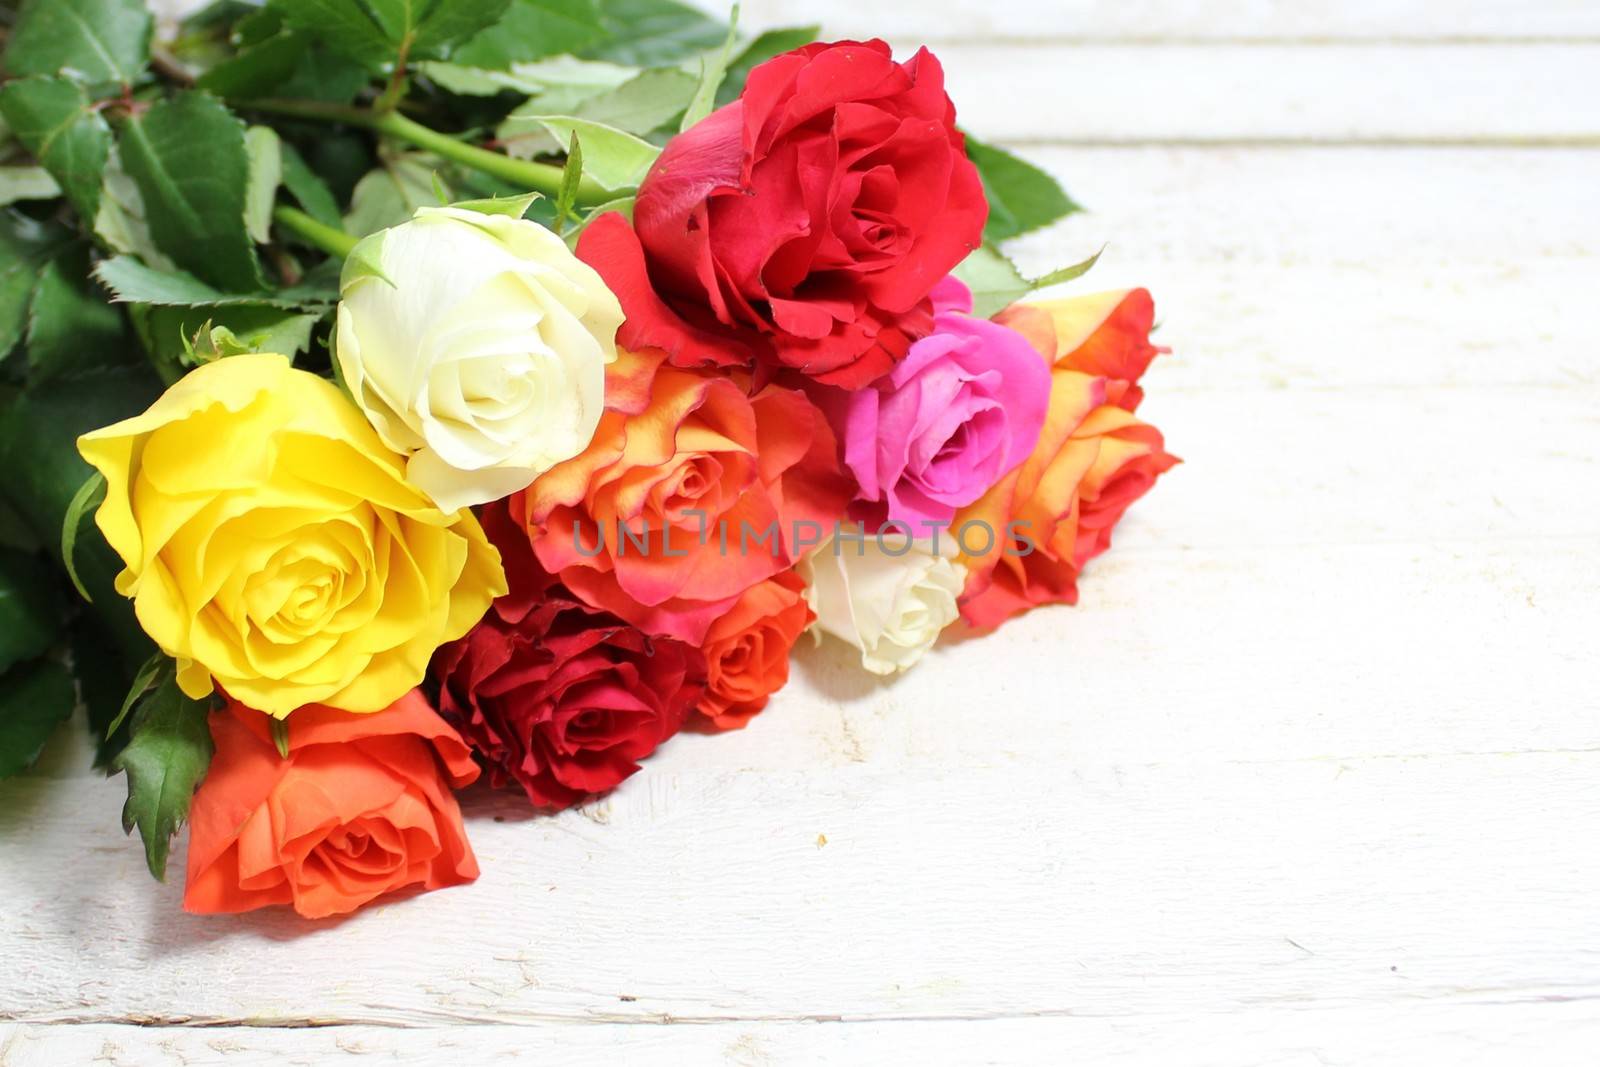 The picture shows colorful roses on white wood.